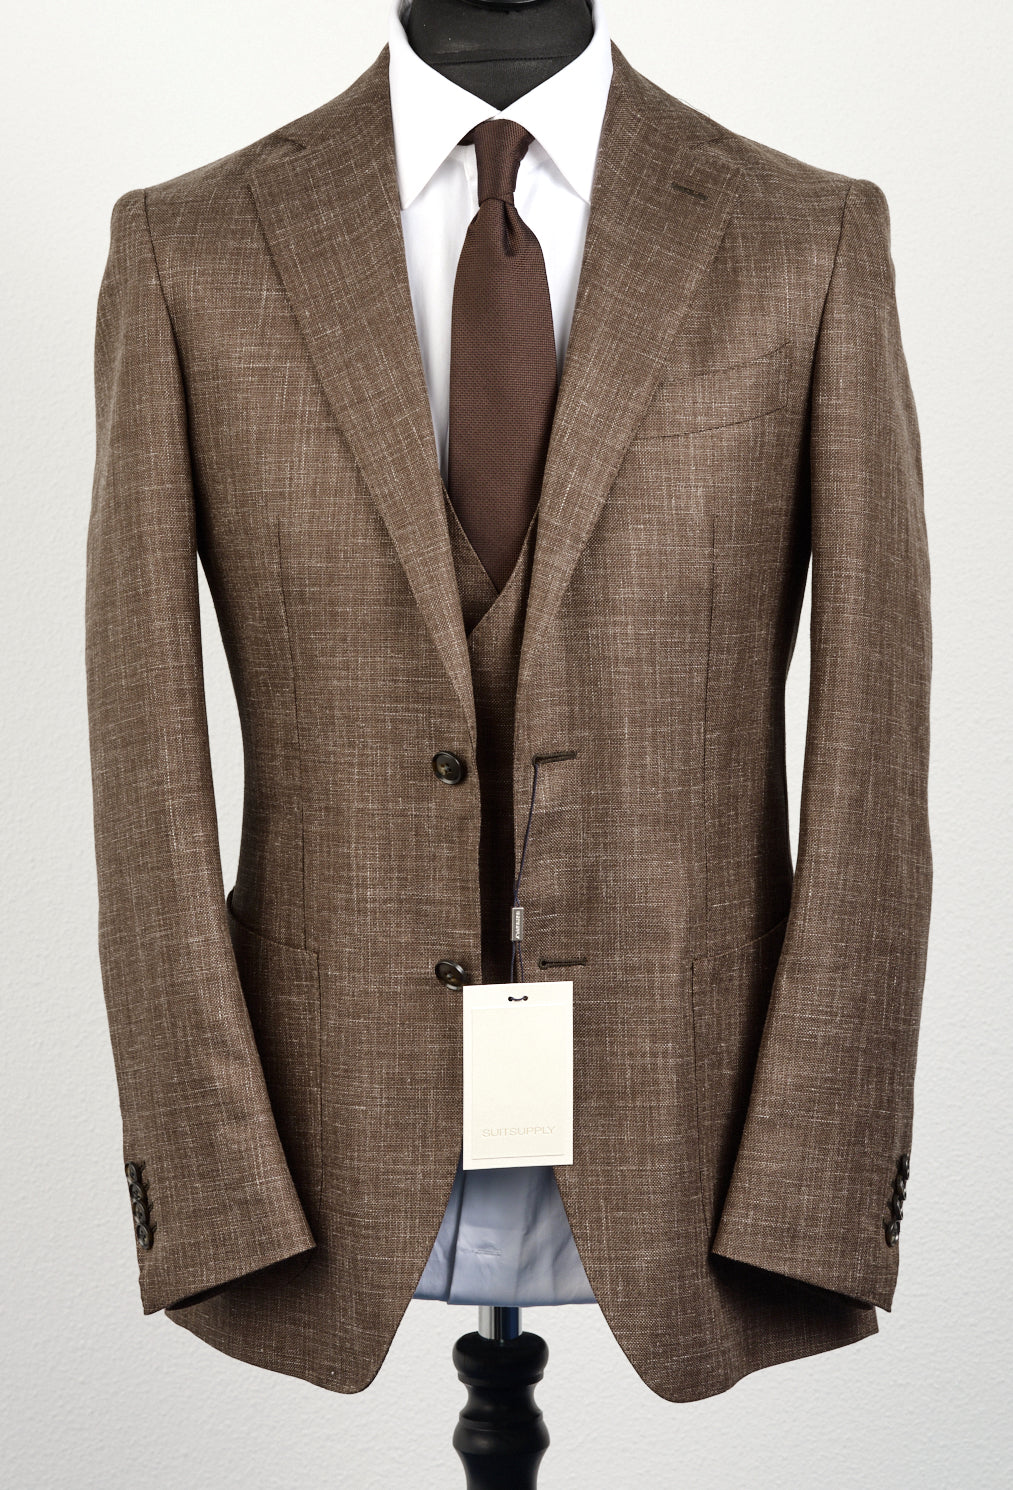 New Suitsupply Havana Brown Wool, Mulberry Silk and Linen 3 Piece DB Suit - Size 36R and 38R